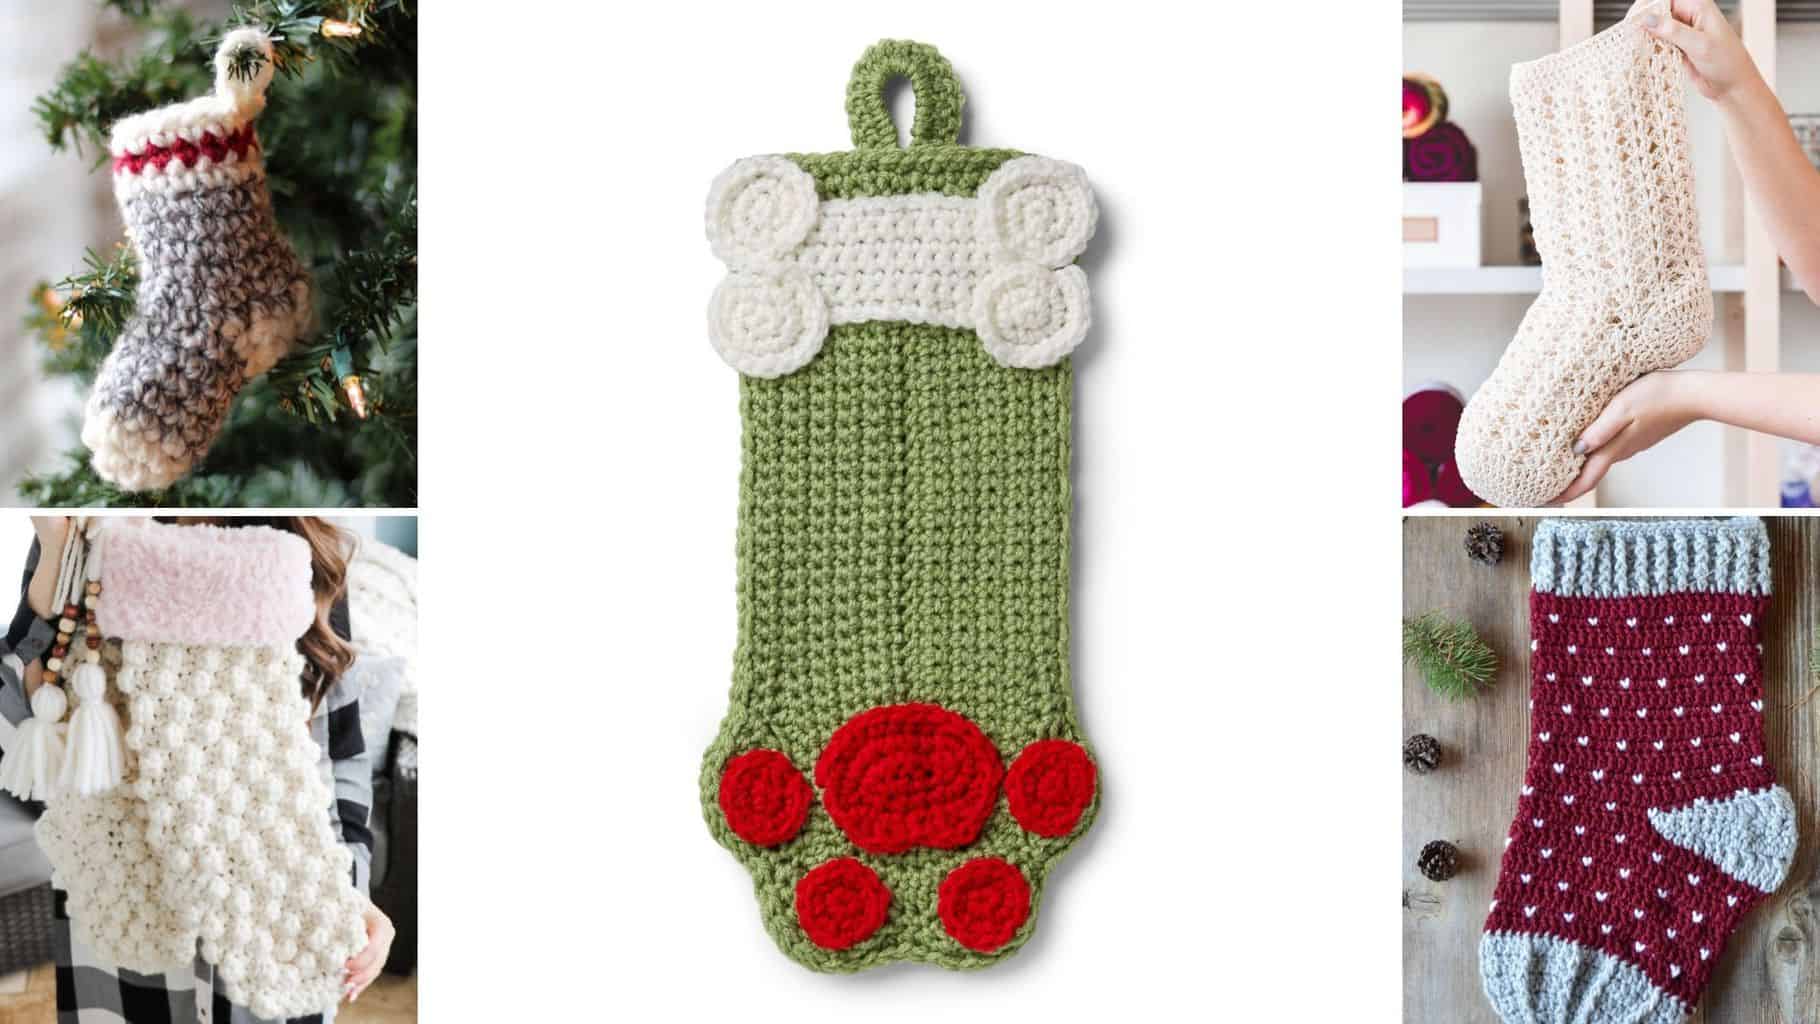 Easy Crochet Christmas Stocking Patterns You'll Want to Make - Easy ...